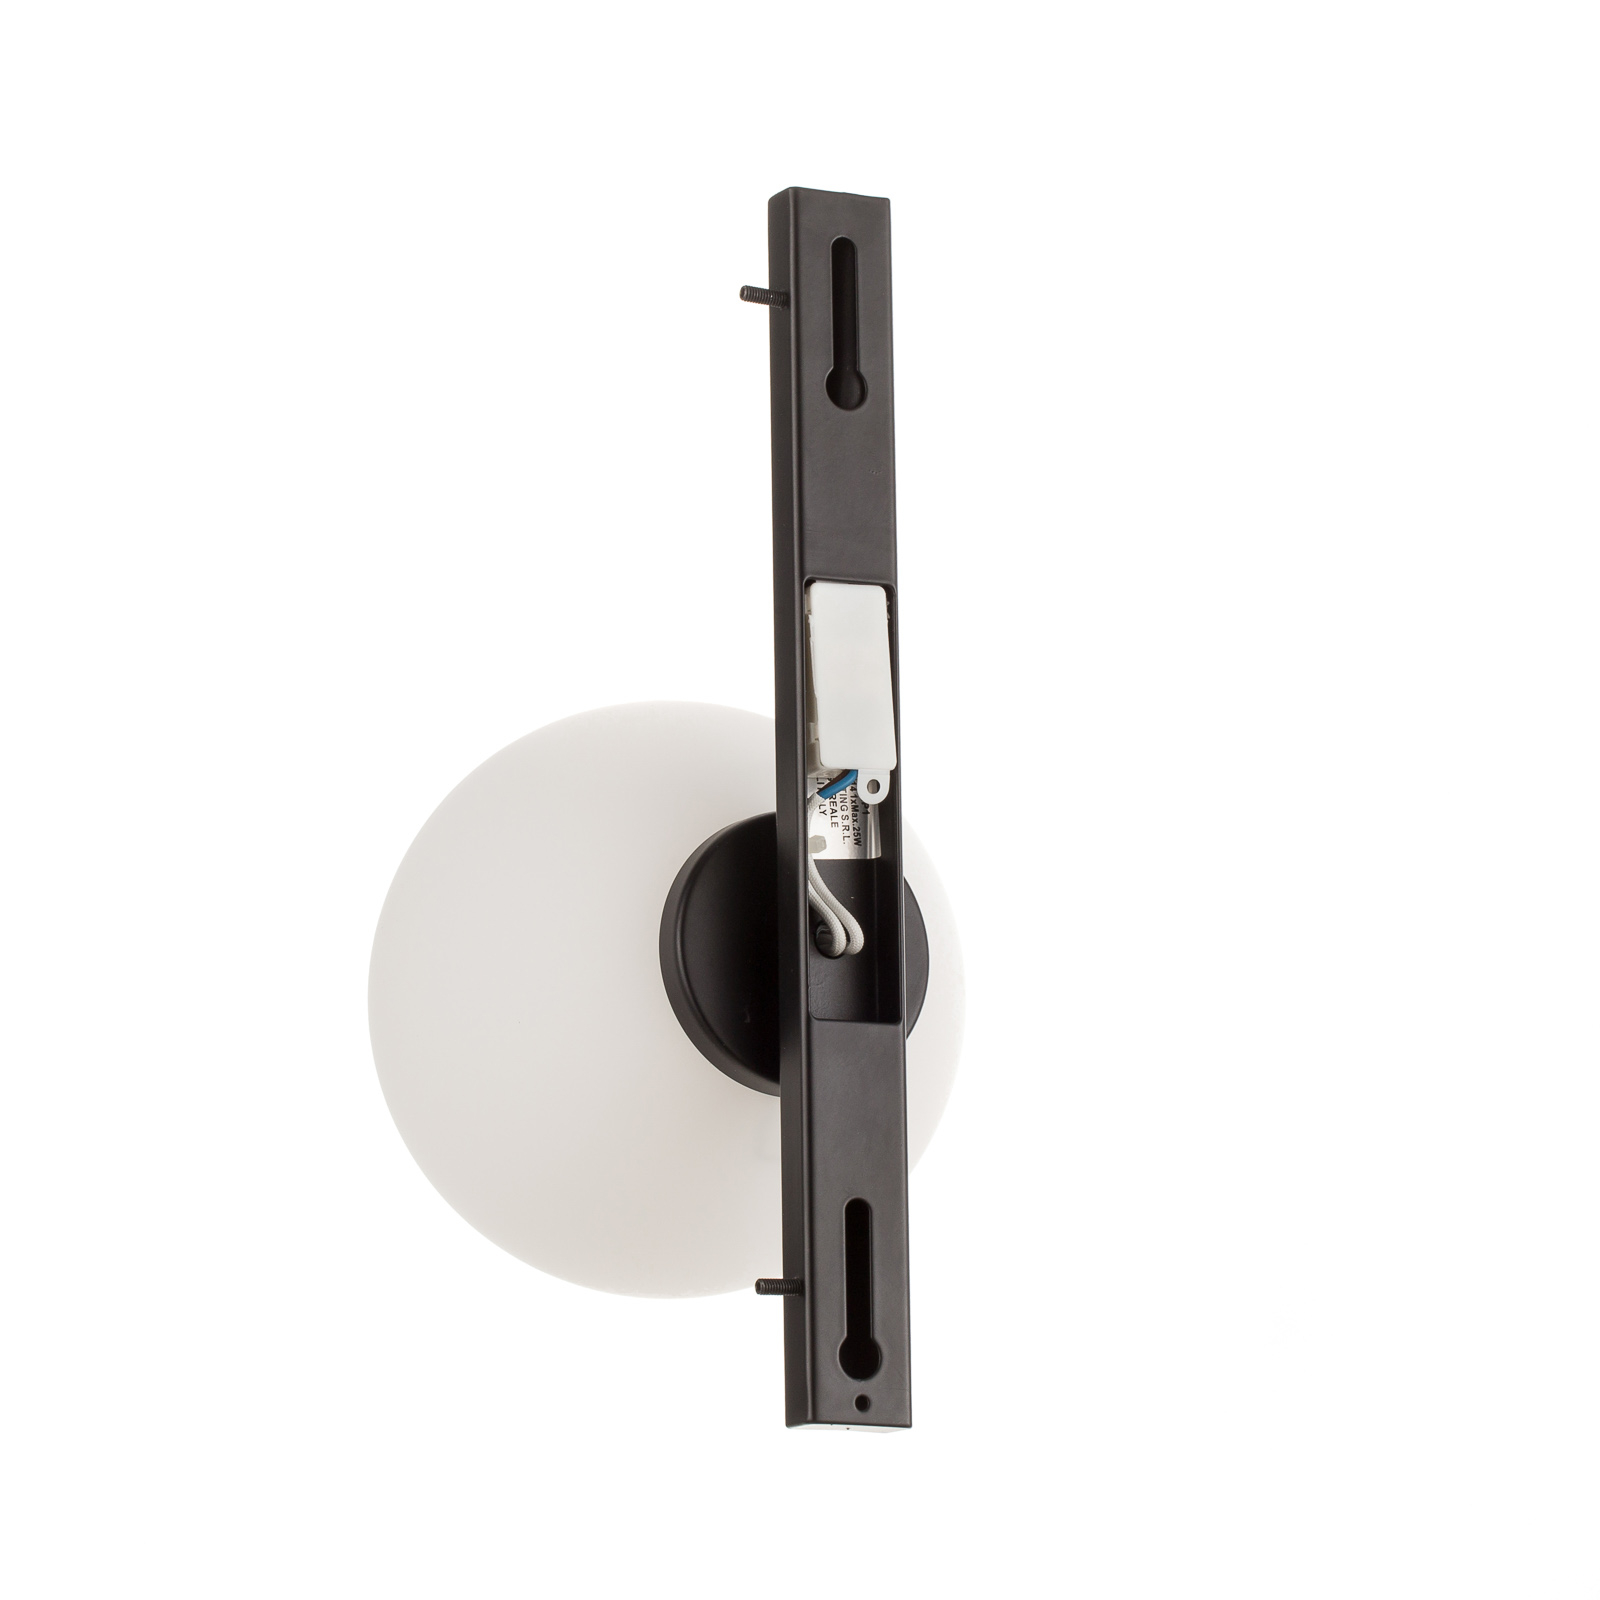 Pluto wall light in black and white, 1-bulb